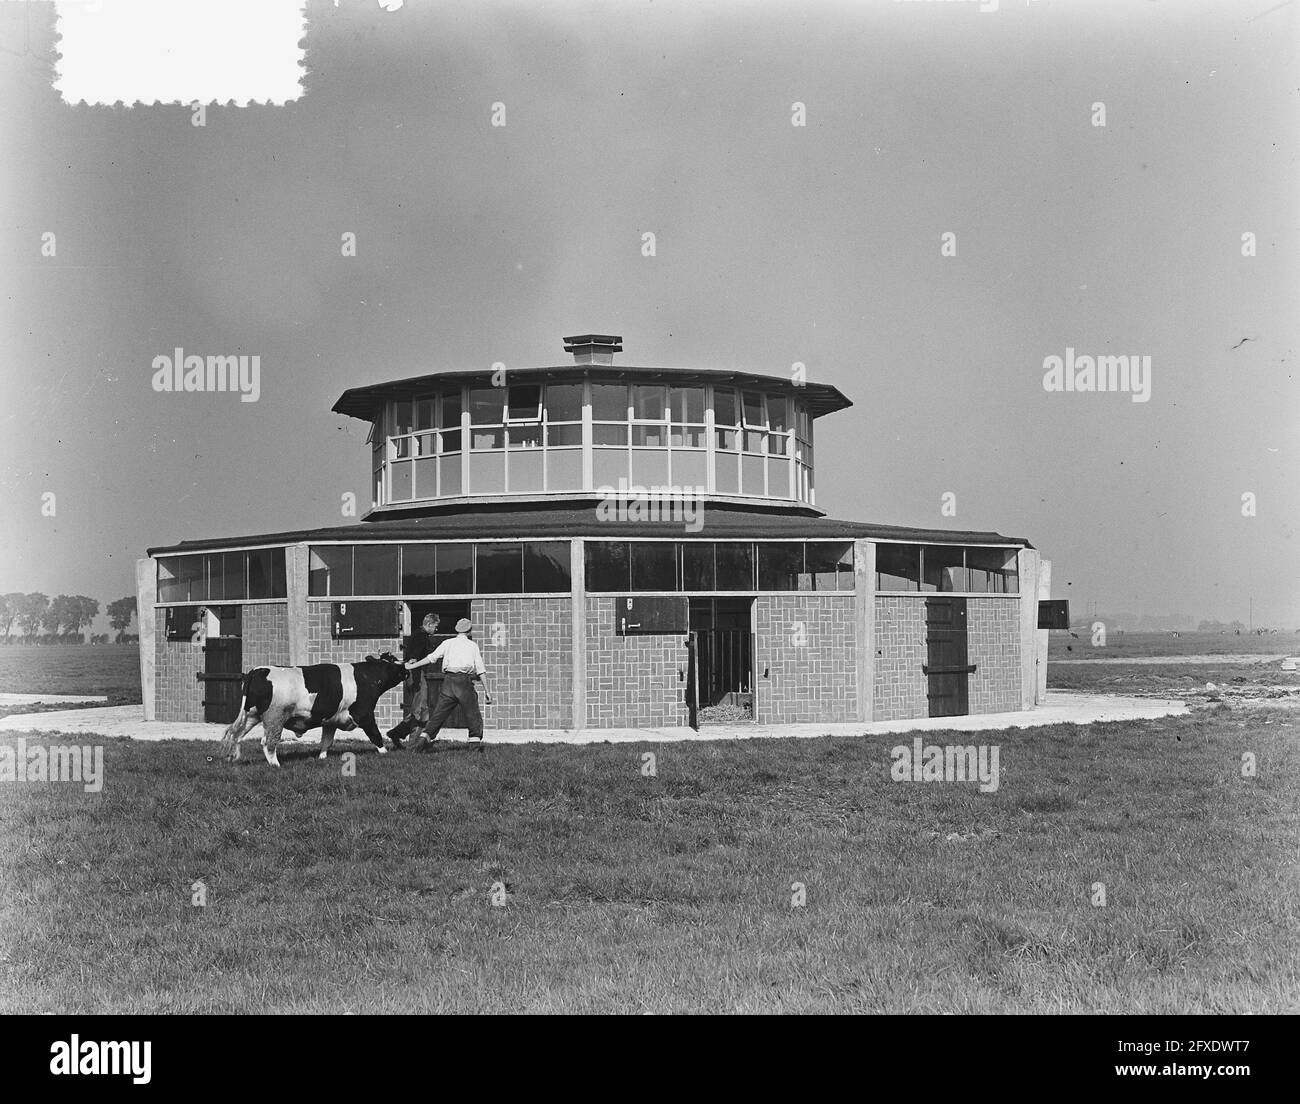 Bullshed Zuiderwoude, exterior, October 4, 1951, The Netherlands, 20th century press agency photo, news to remember, documentary, historic photography 1945-1990, visual stories, human history of the Twentieth Century, capturing moments in time Stock Photo